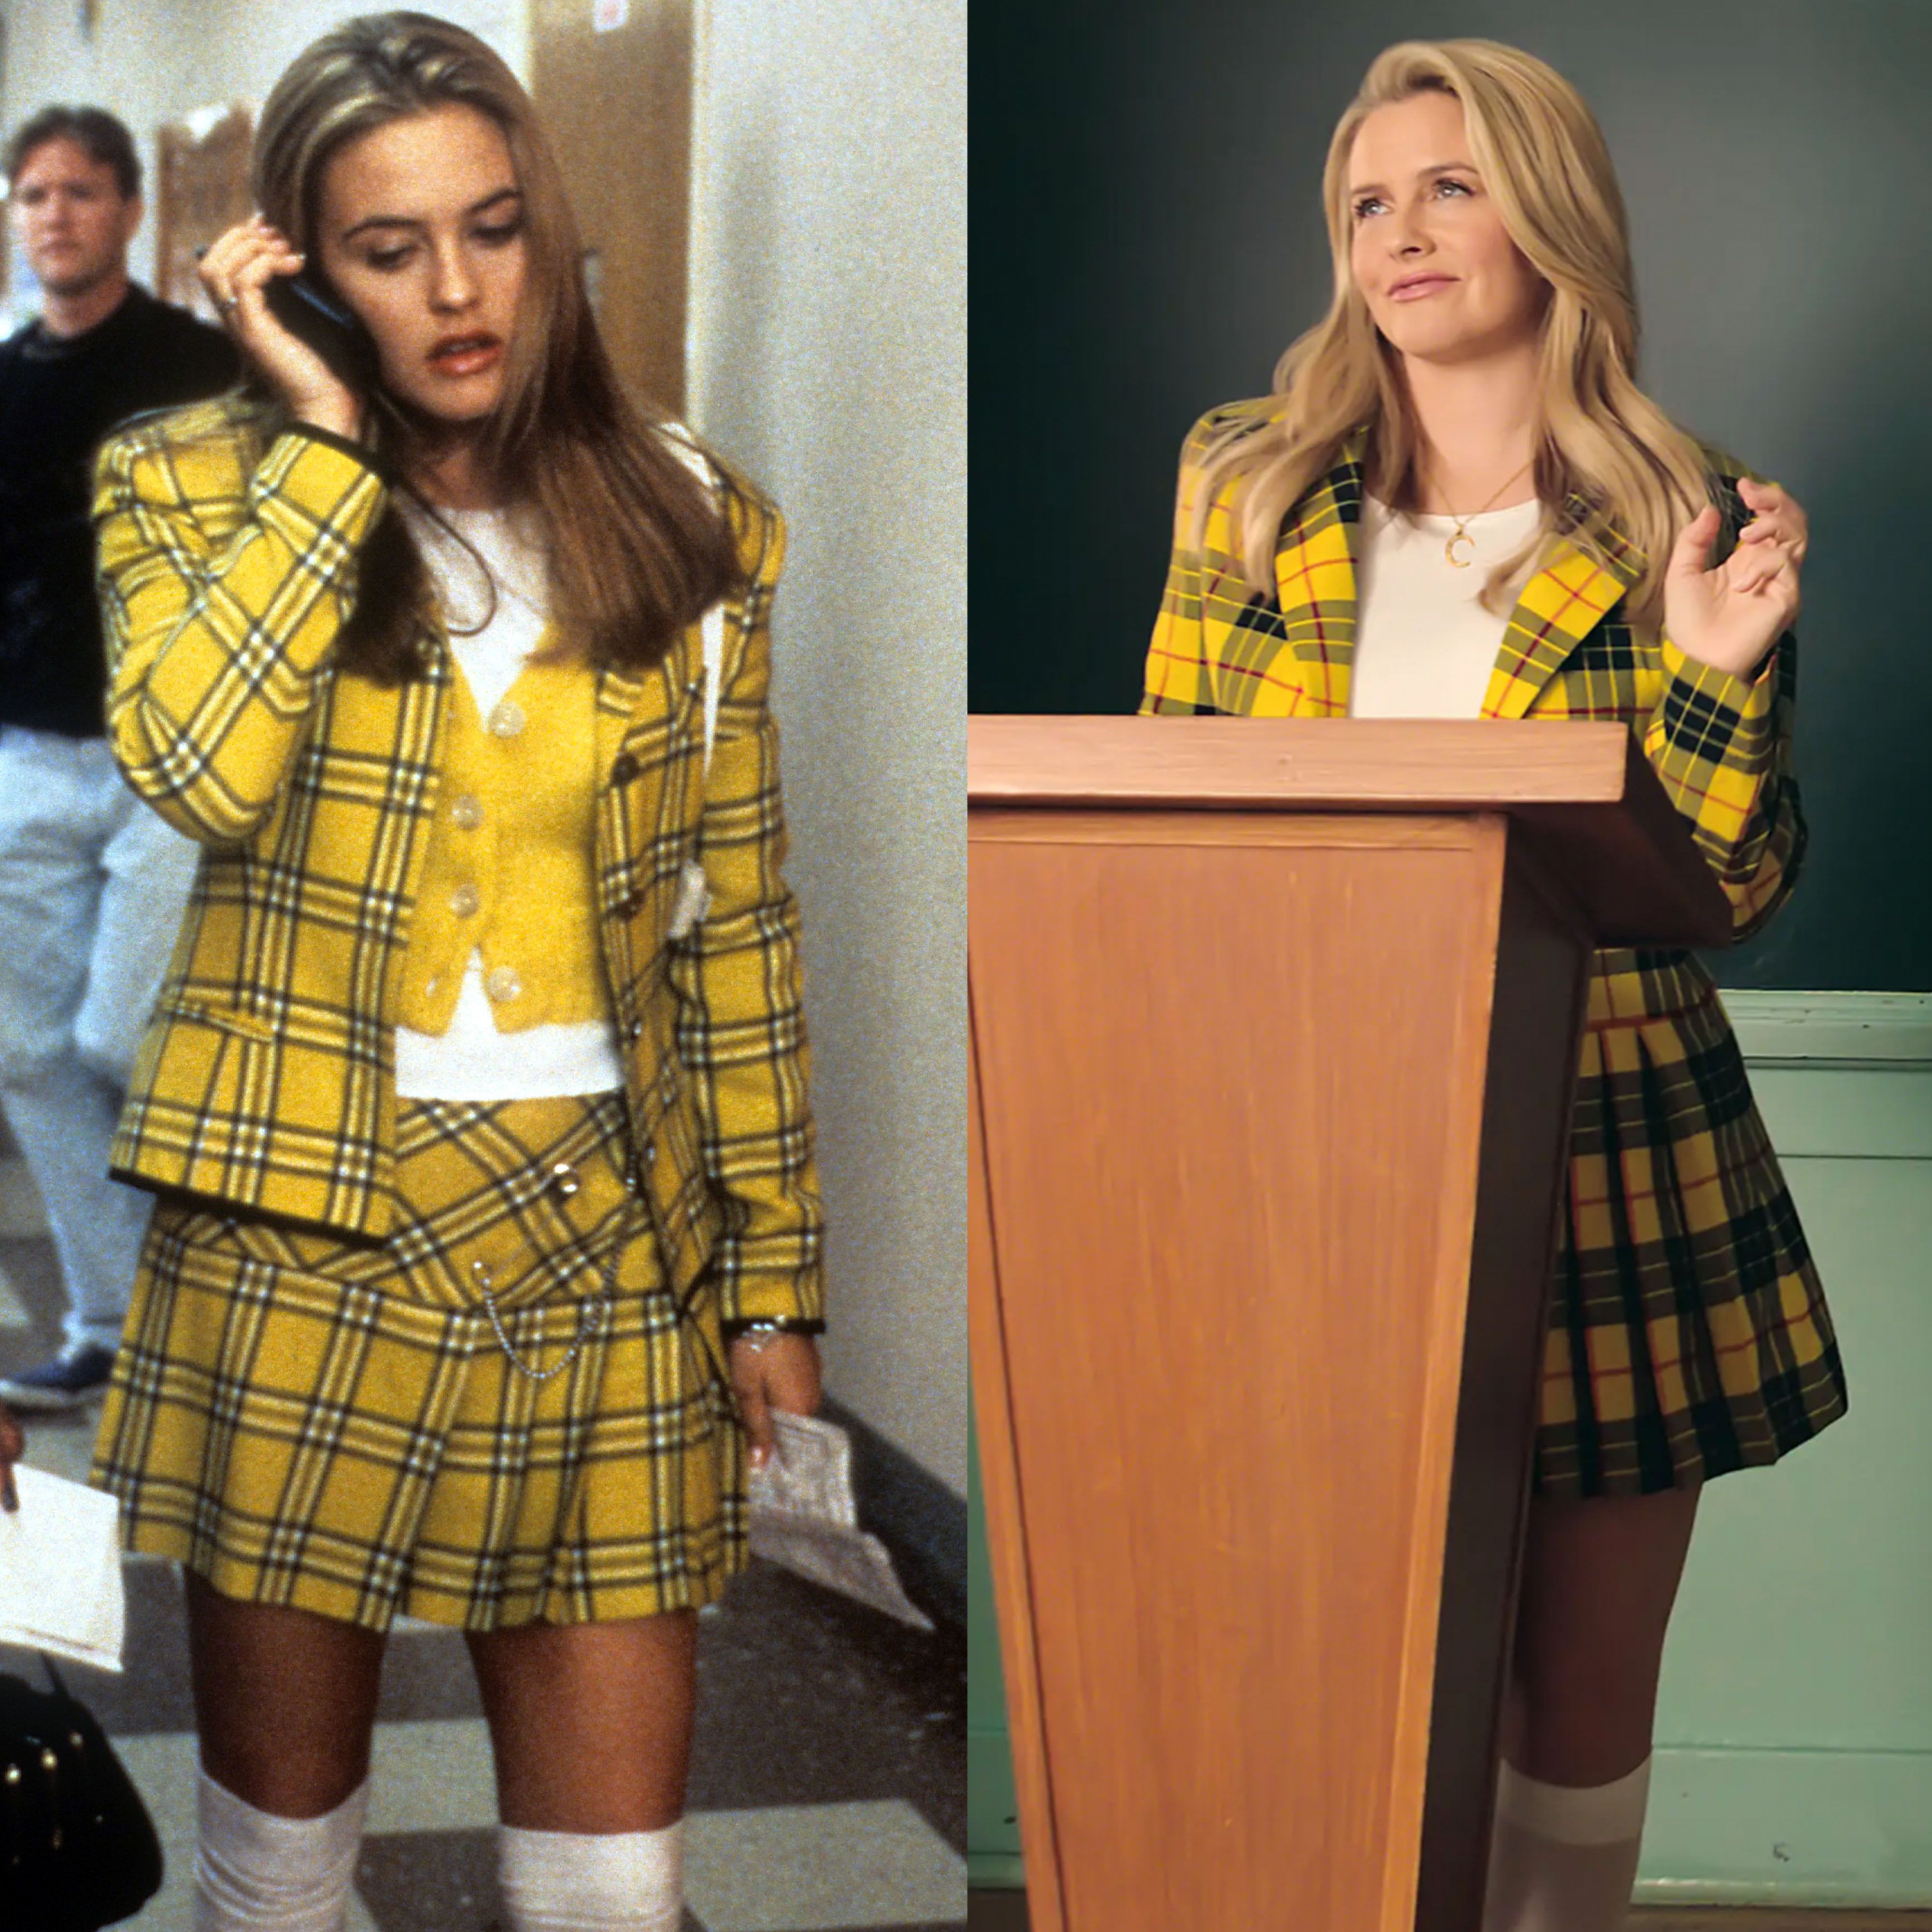 Alicia Silverstone on iconic yellow plaid outfit from 'Clueless